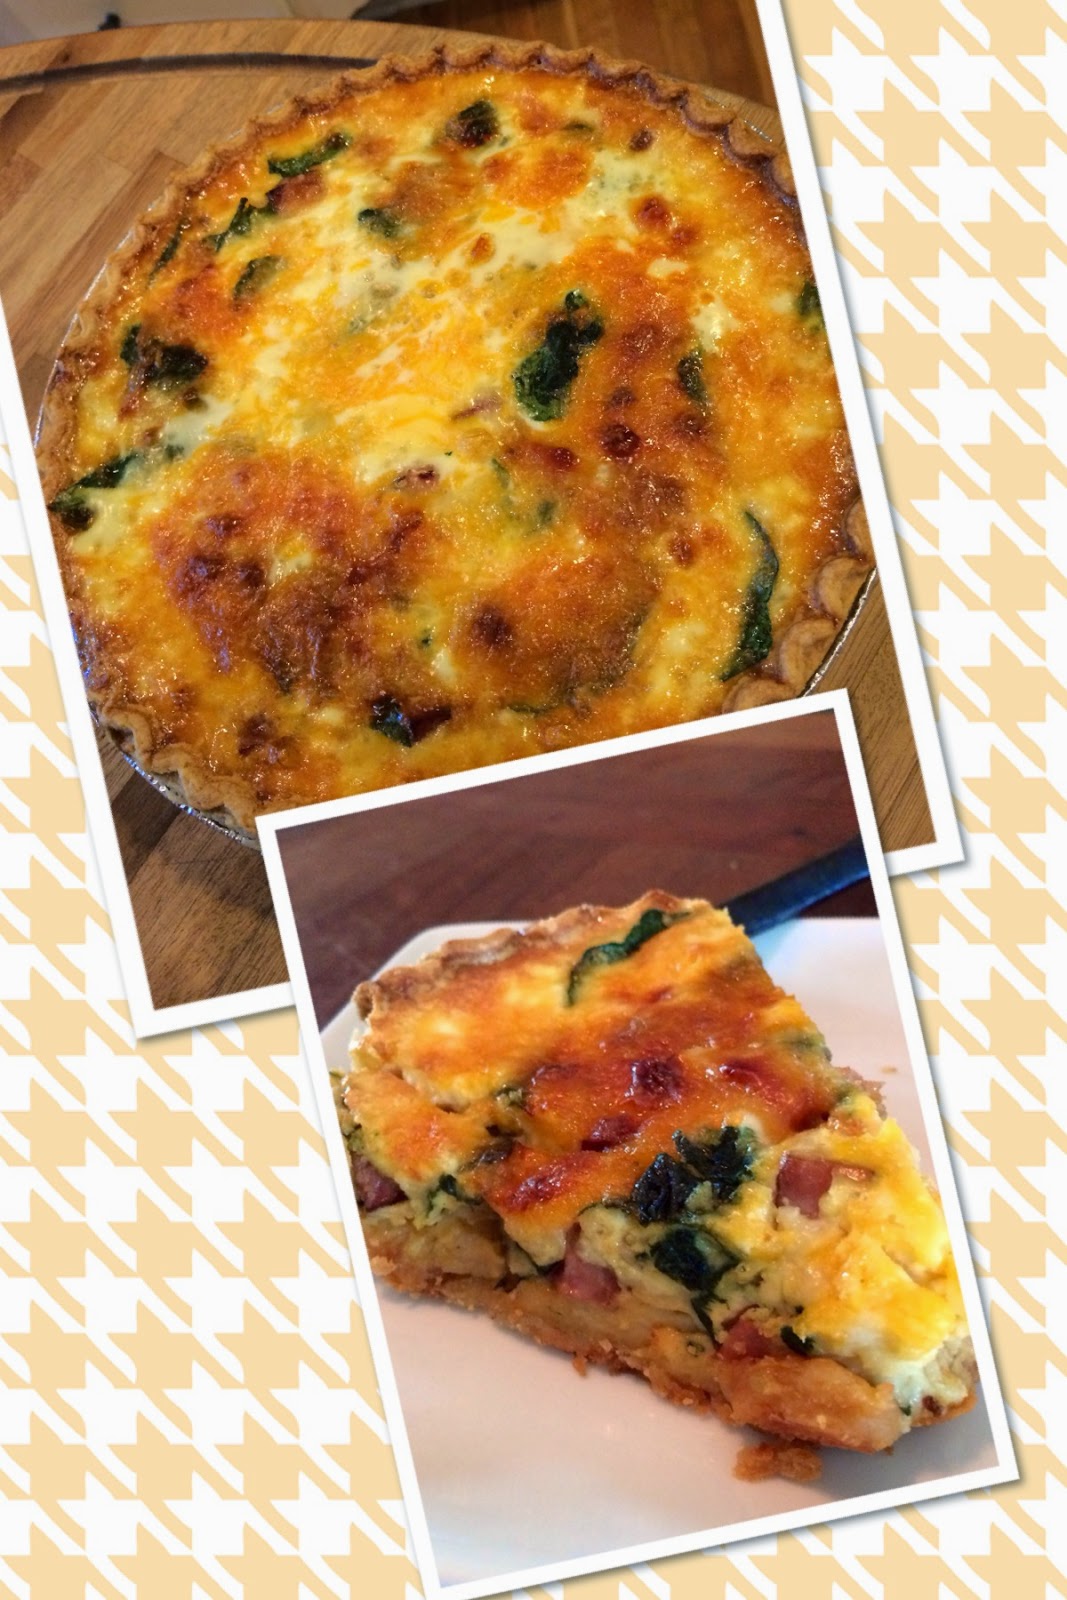 Dream Home Cooking Girl: I love quiche! Here is my very simple recipe ...